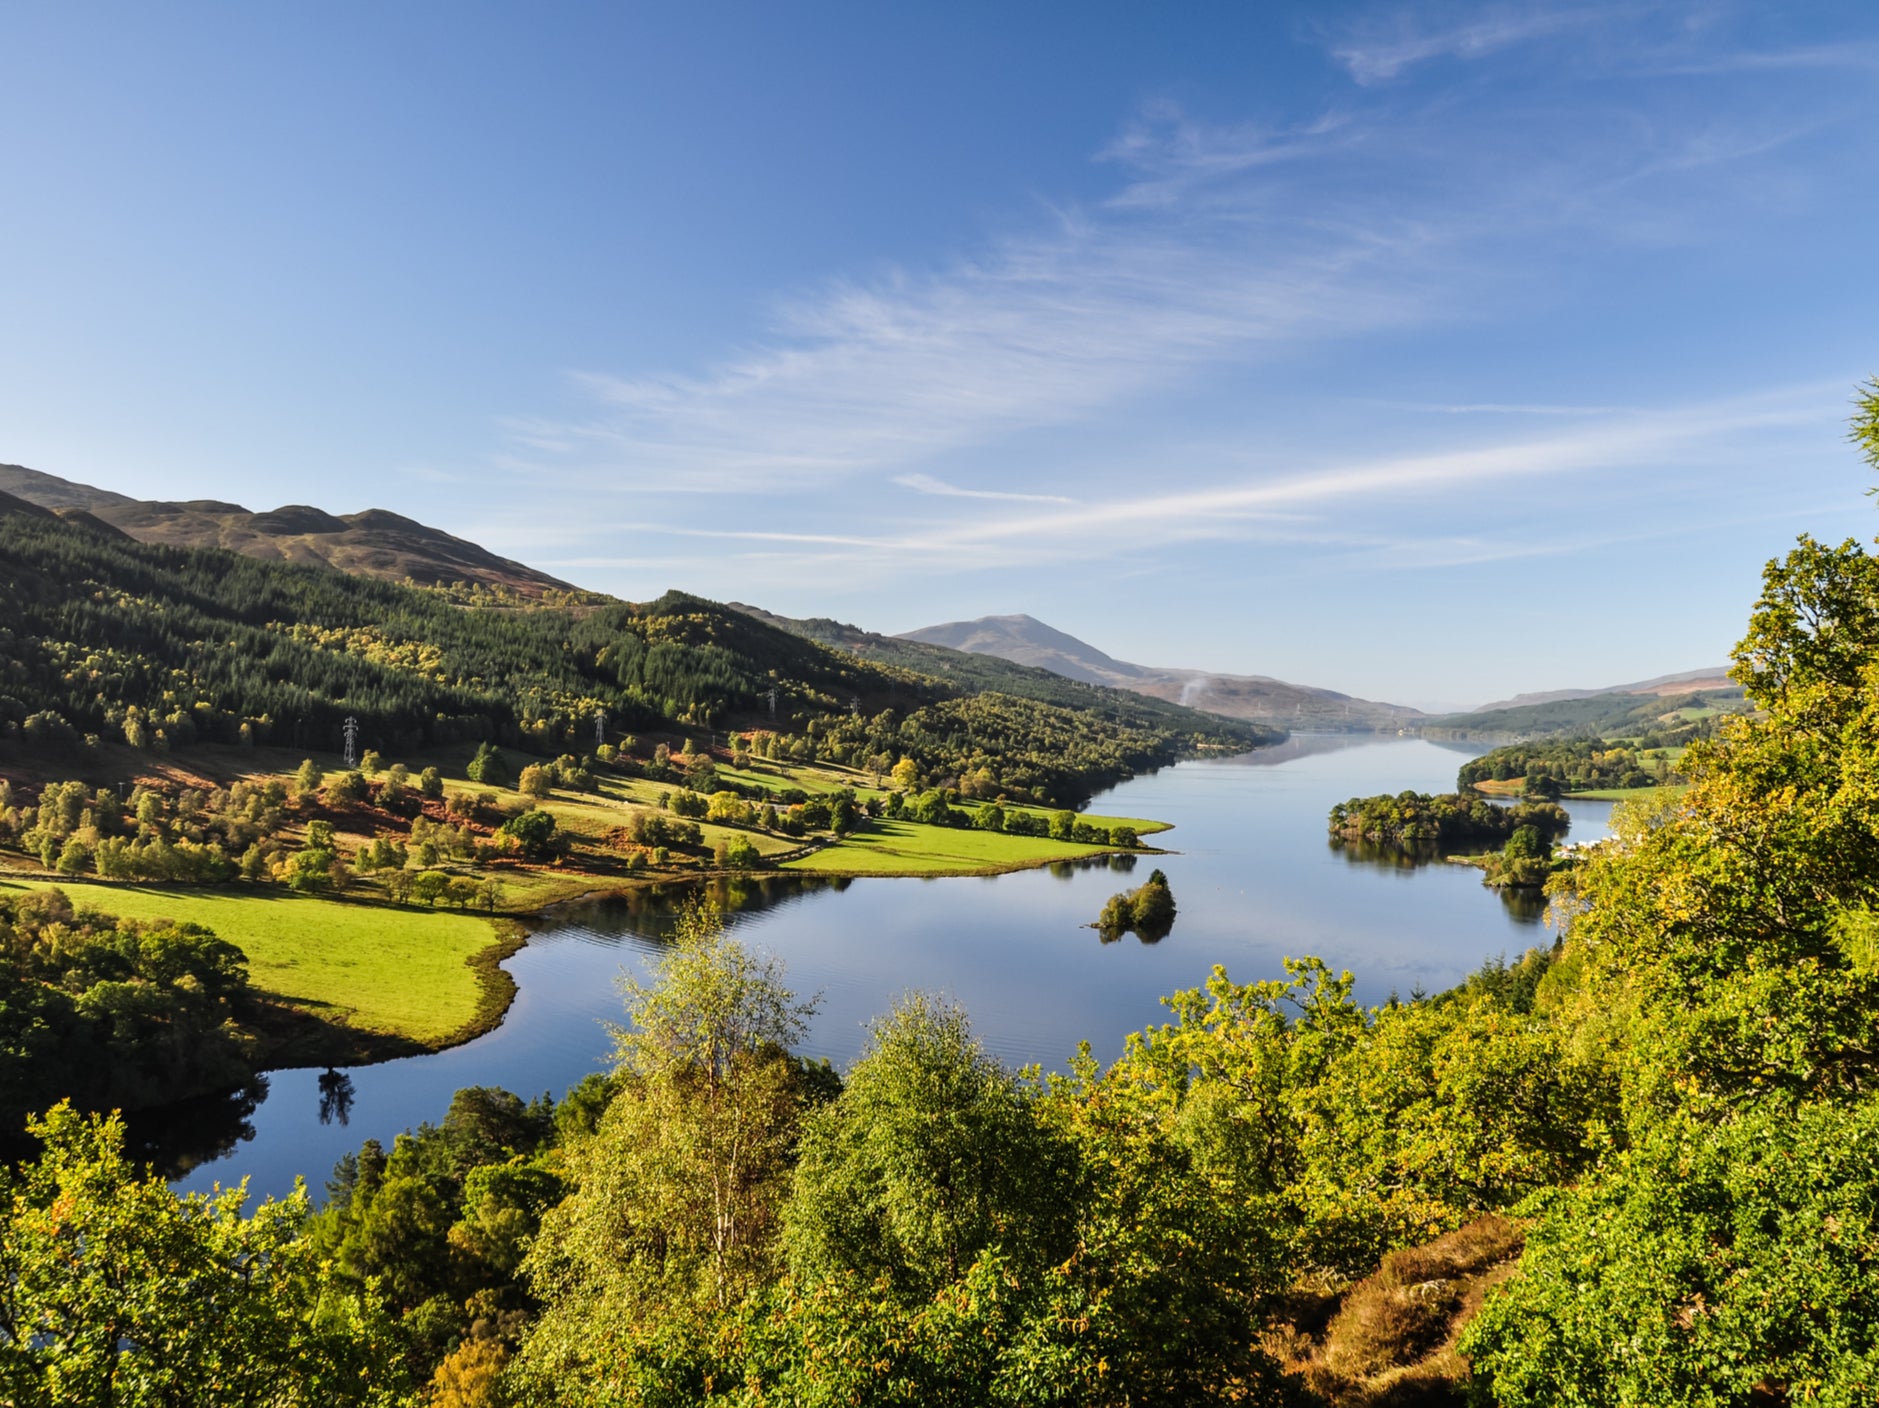 Loch Tummel in Perthshire. Some Scottish lochs are warming at rapid rates, which could exacerbate toxic algal blooms